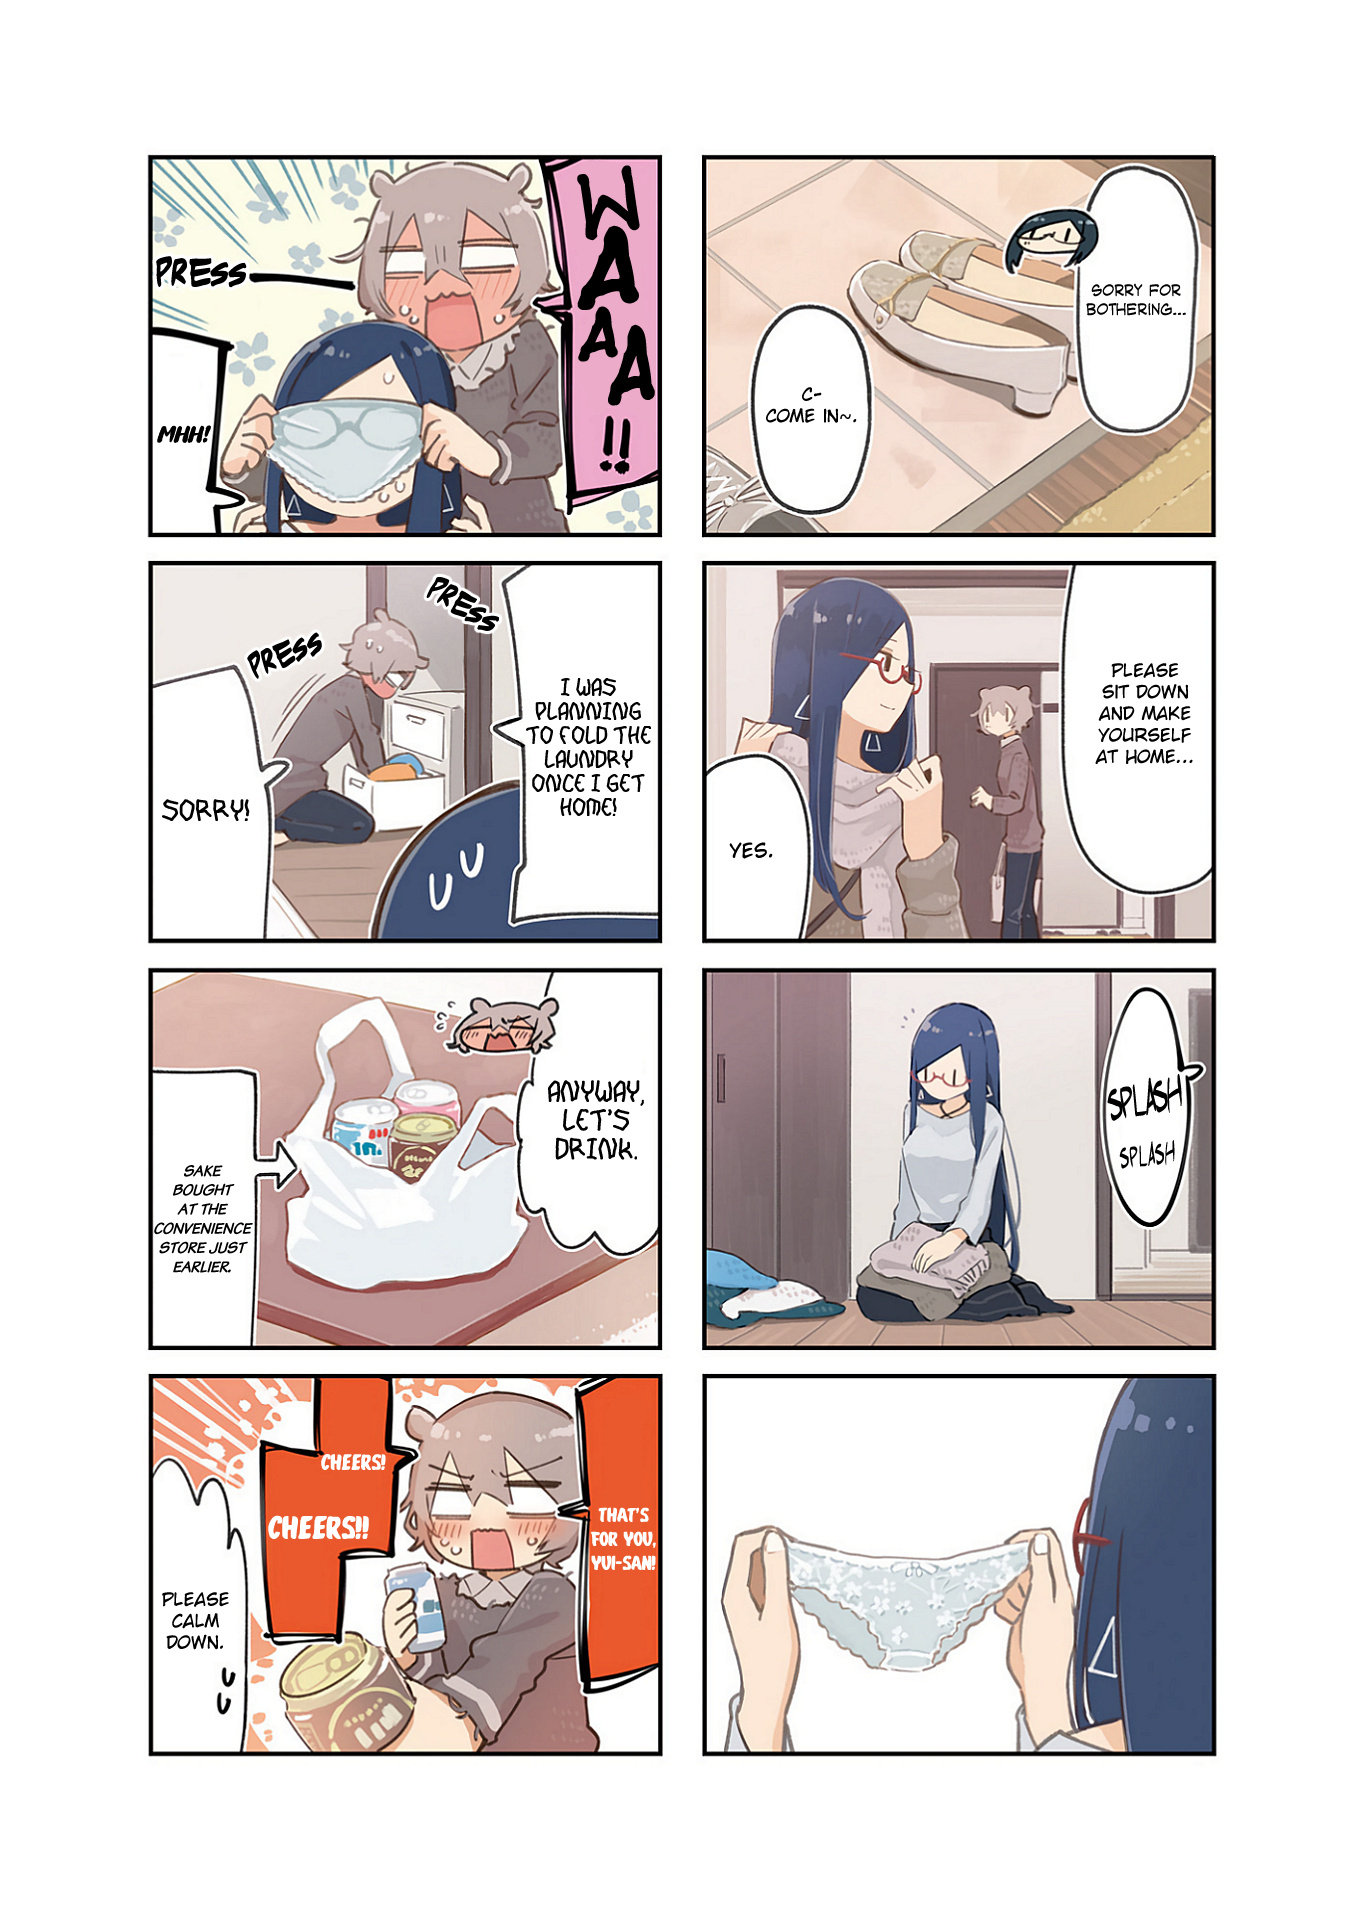 Hogushite, Yui-San Vol.1 Chapter 13: Home Date - Picture 2